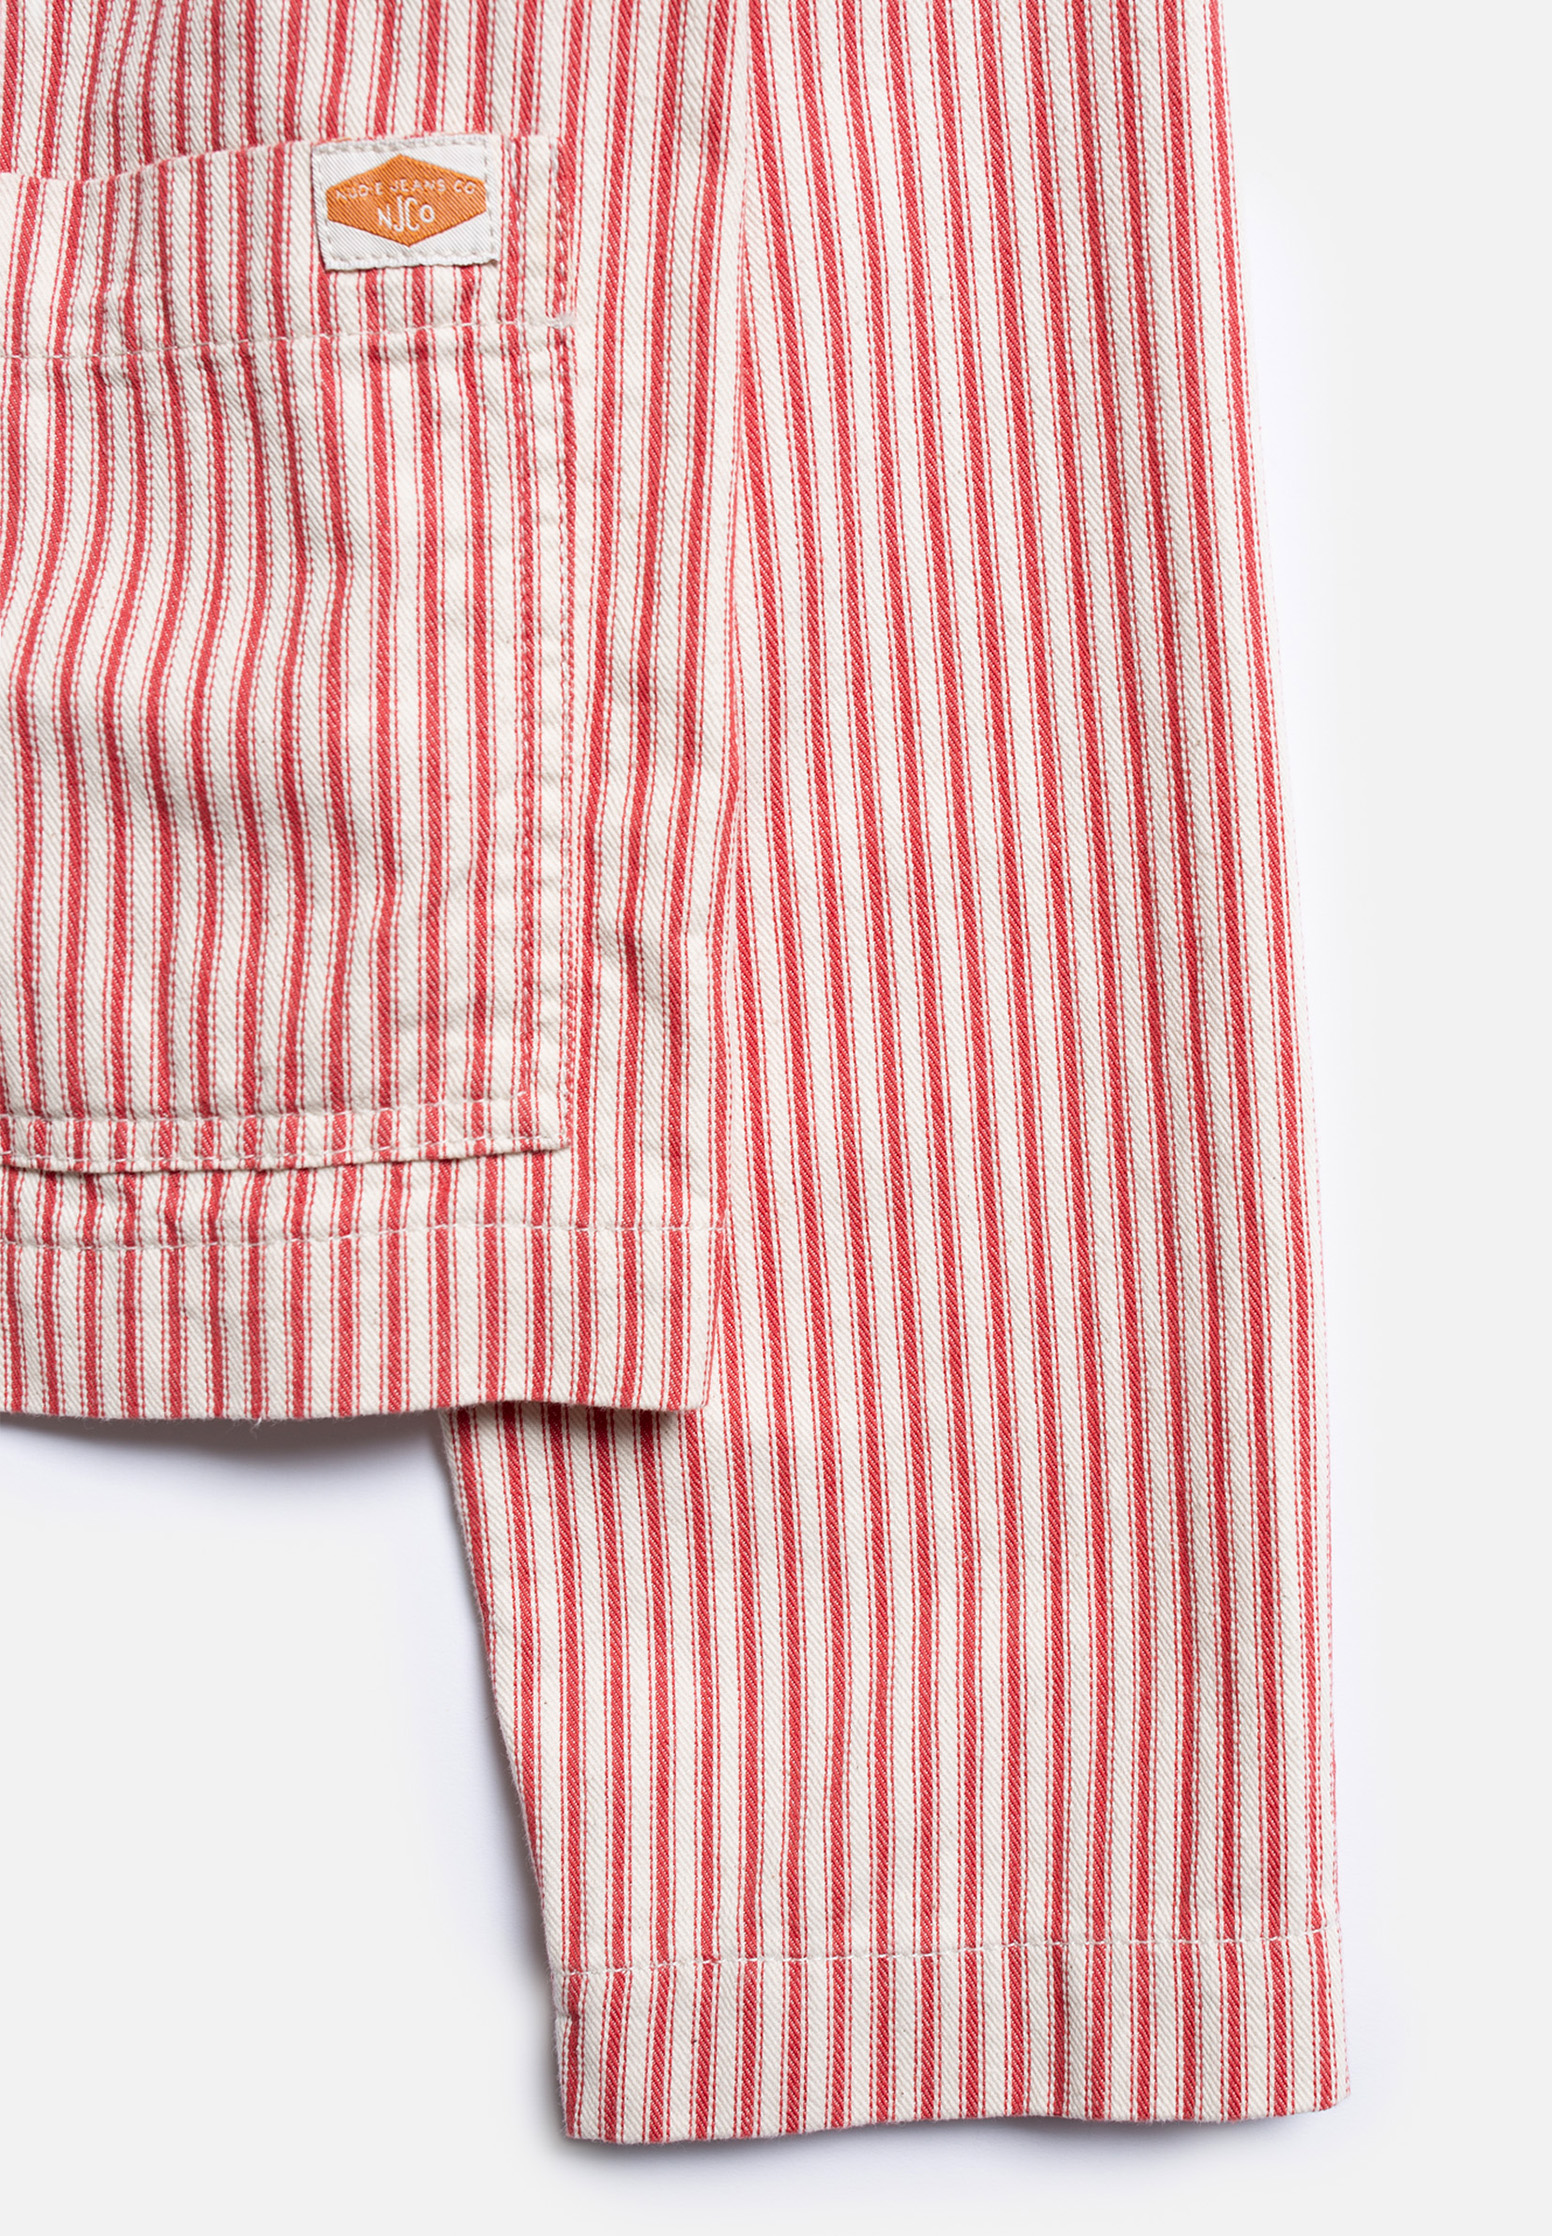 NUDIE JEANS Denim Shirt Isa Striped red/white S